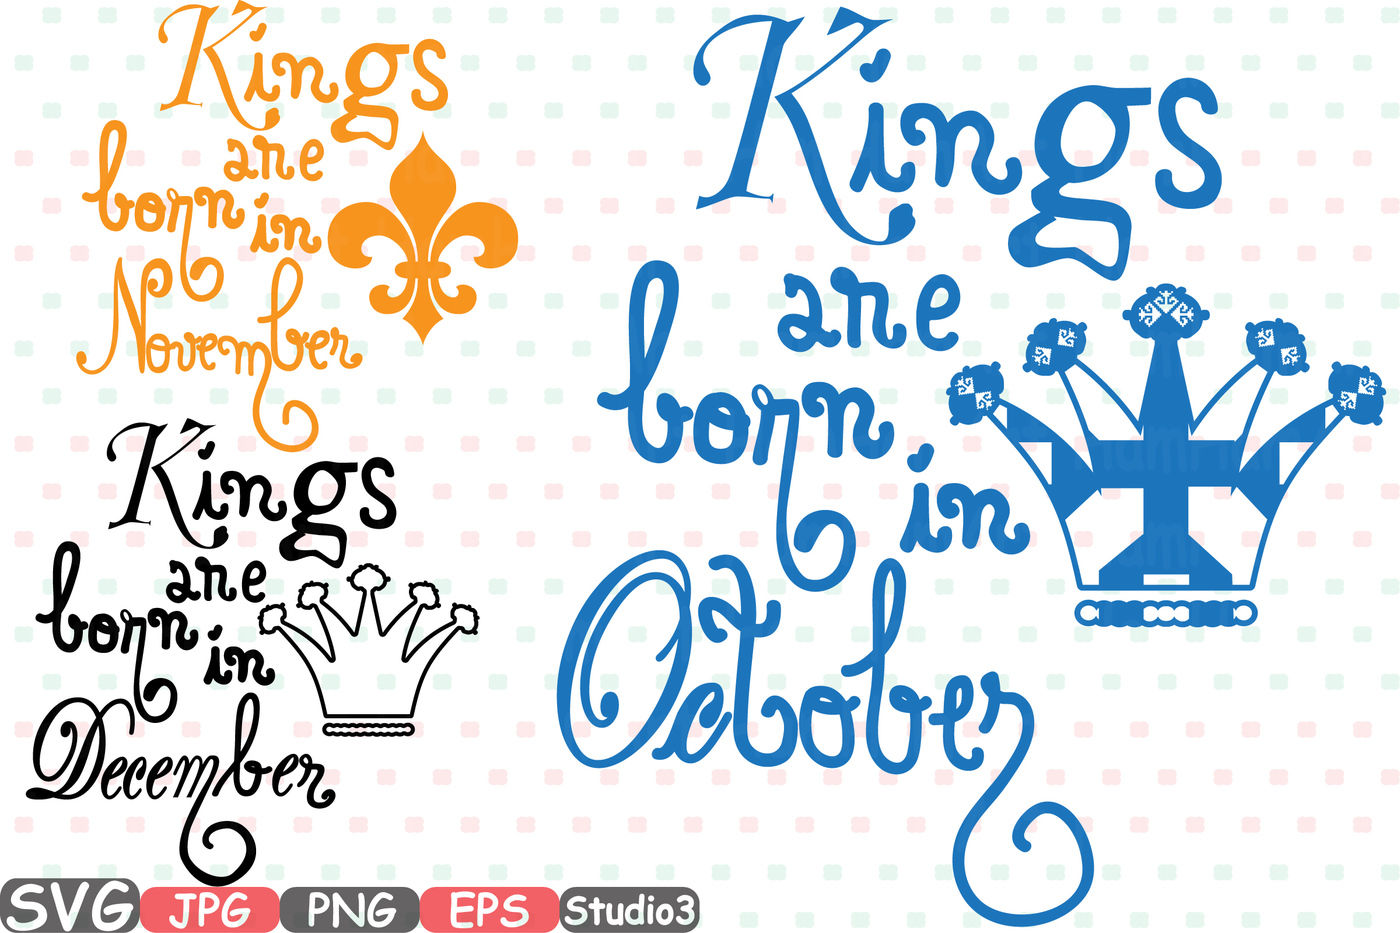 Download Kings Are Born In October November December Silhouette Svg Clipart Royal King Has Arrived Baby Boy Birth Born Crown Birthday Studio 3 610s By Hamhamart Thehungryjpeg Com